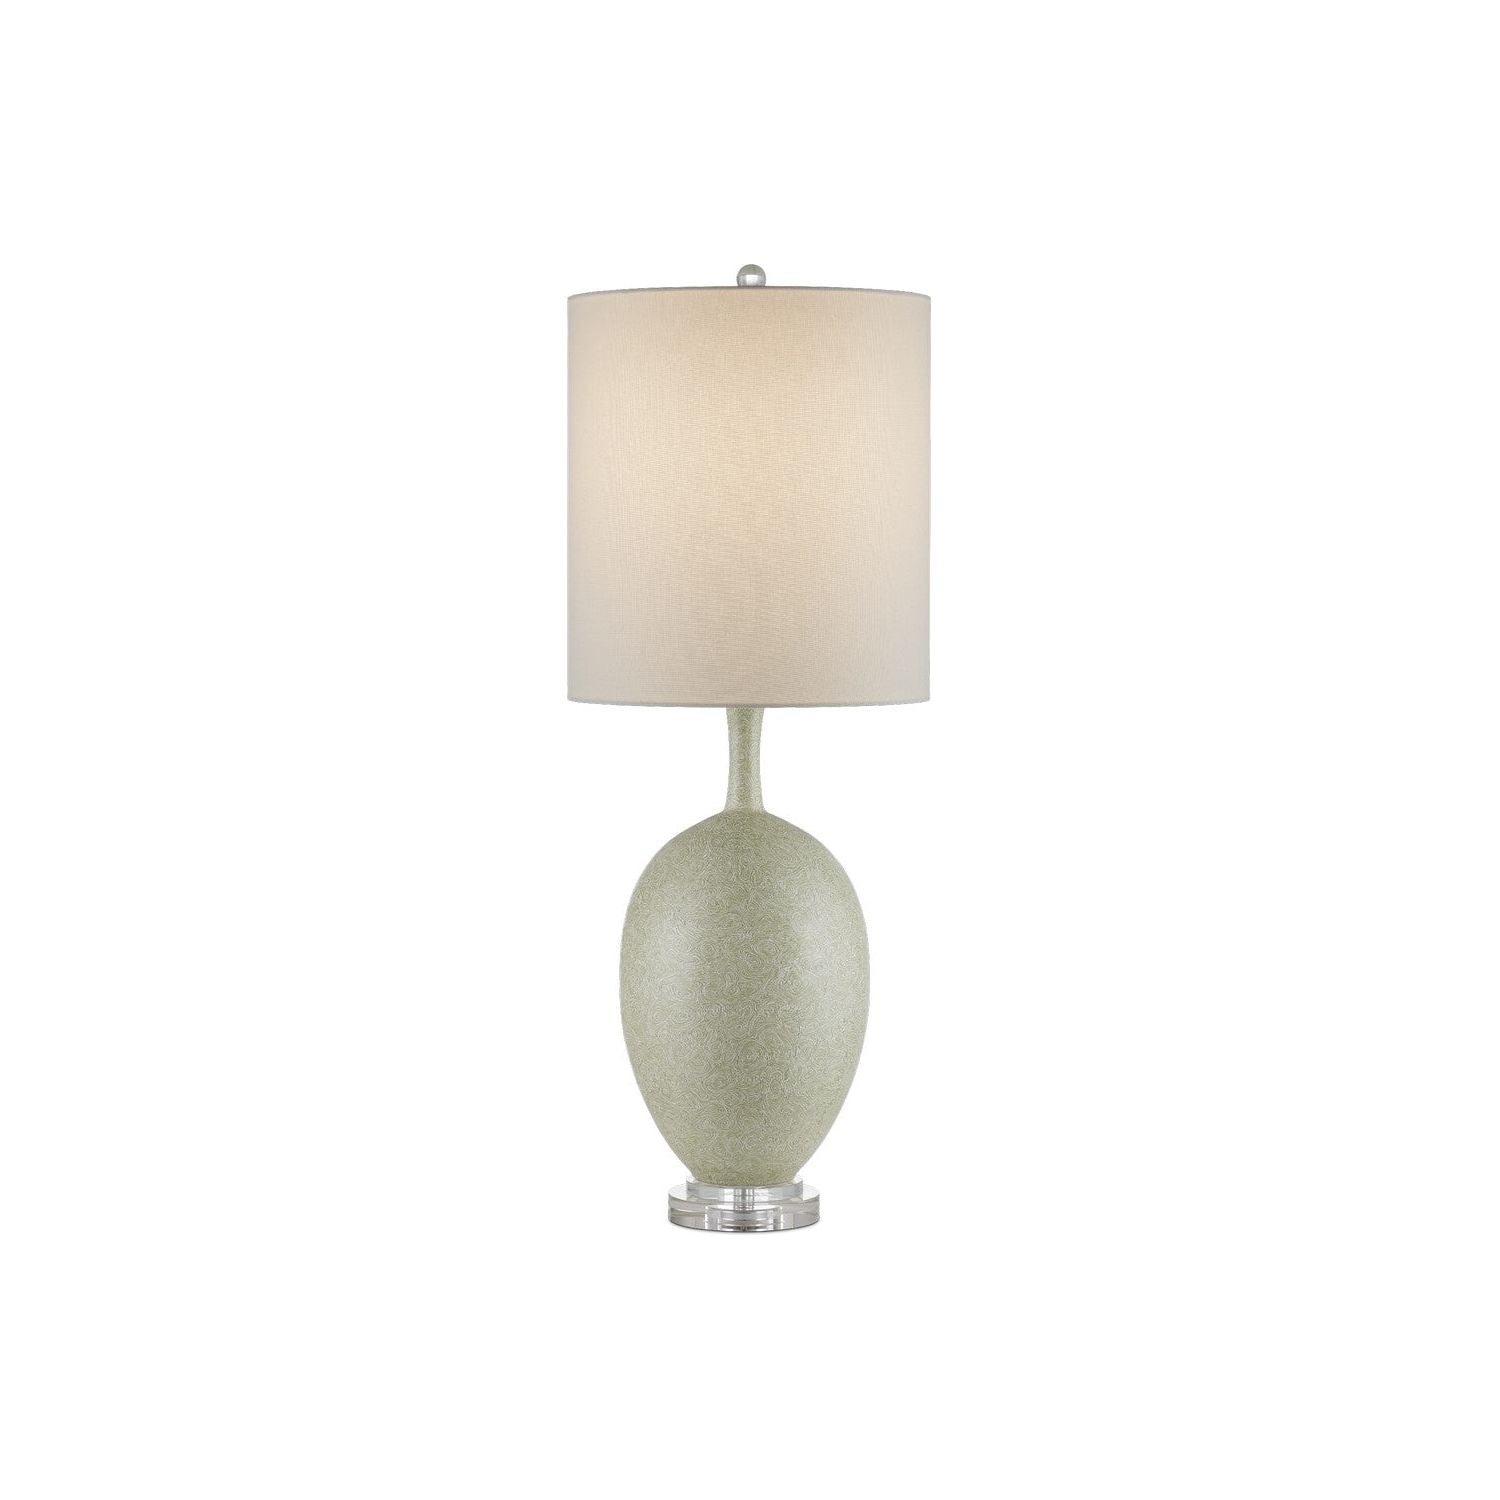 Currey and Company - 6000-0936 - One Light Table Lamp - Green/Off-White/Clear/Satin Nickel